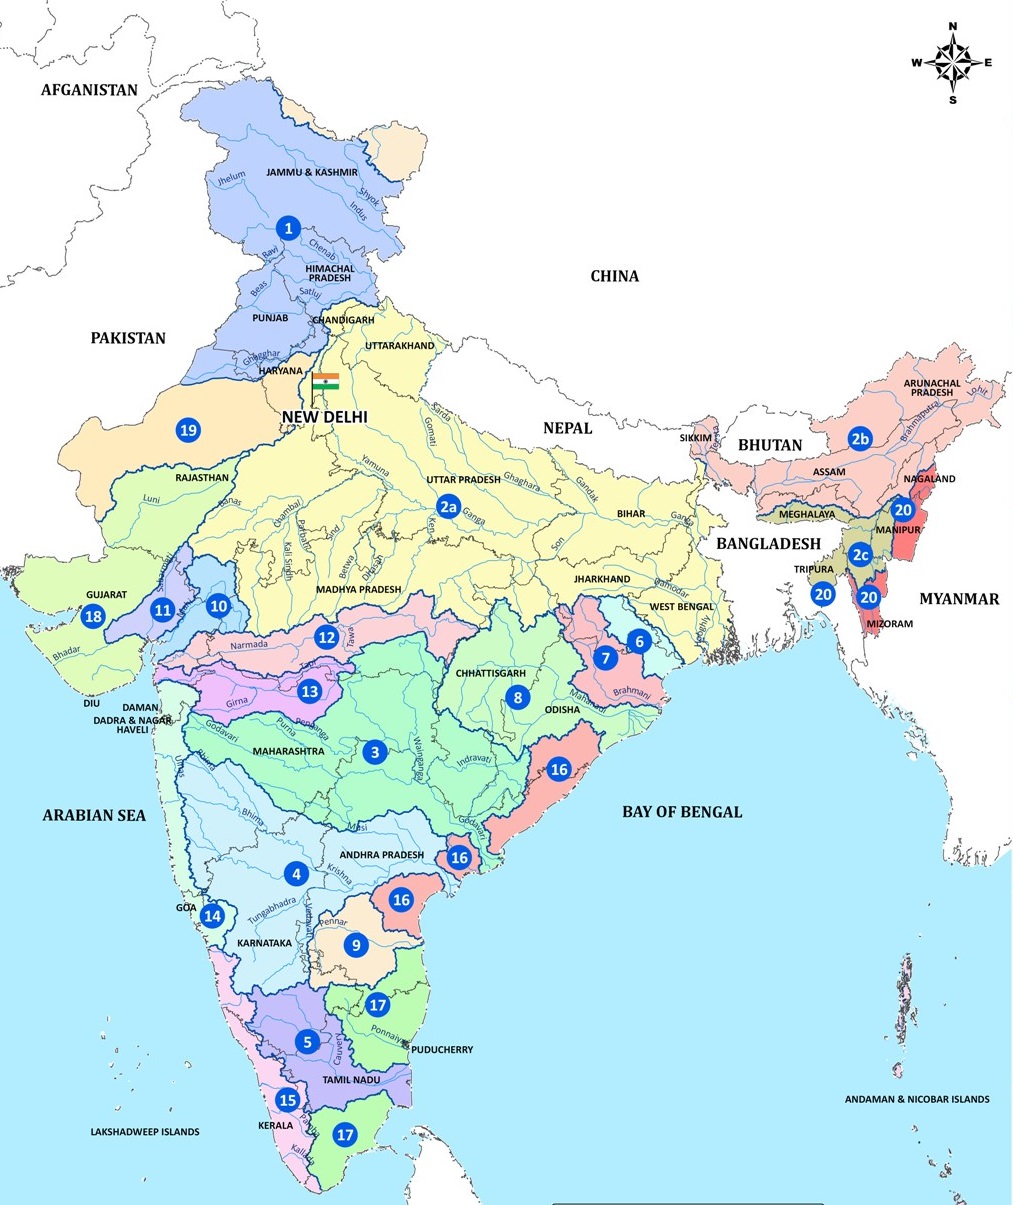 River Drainage Map